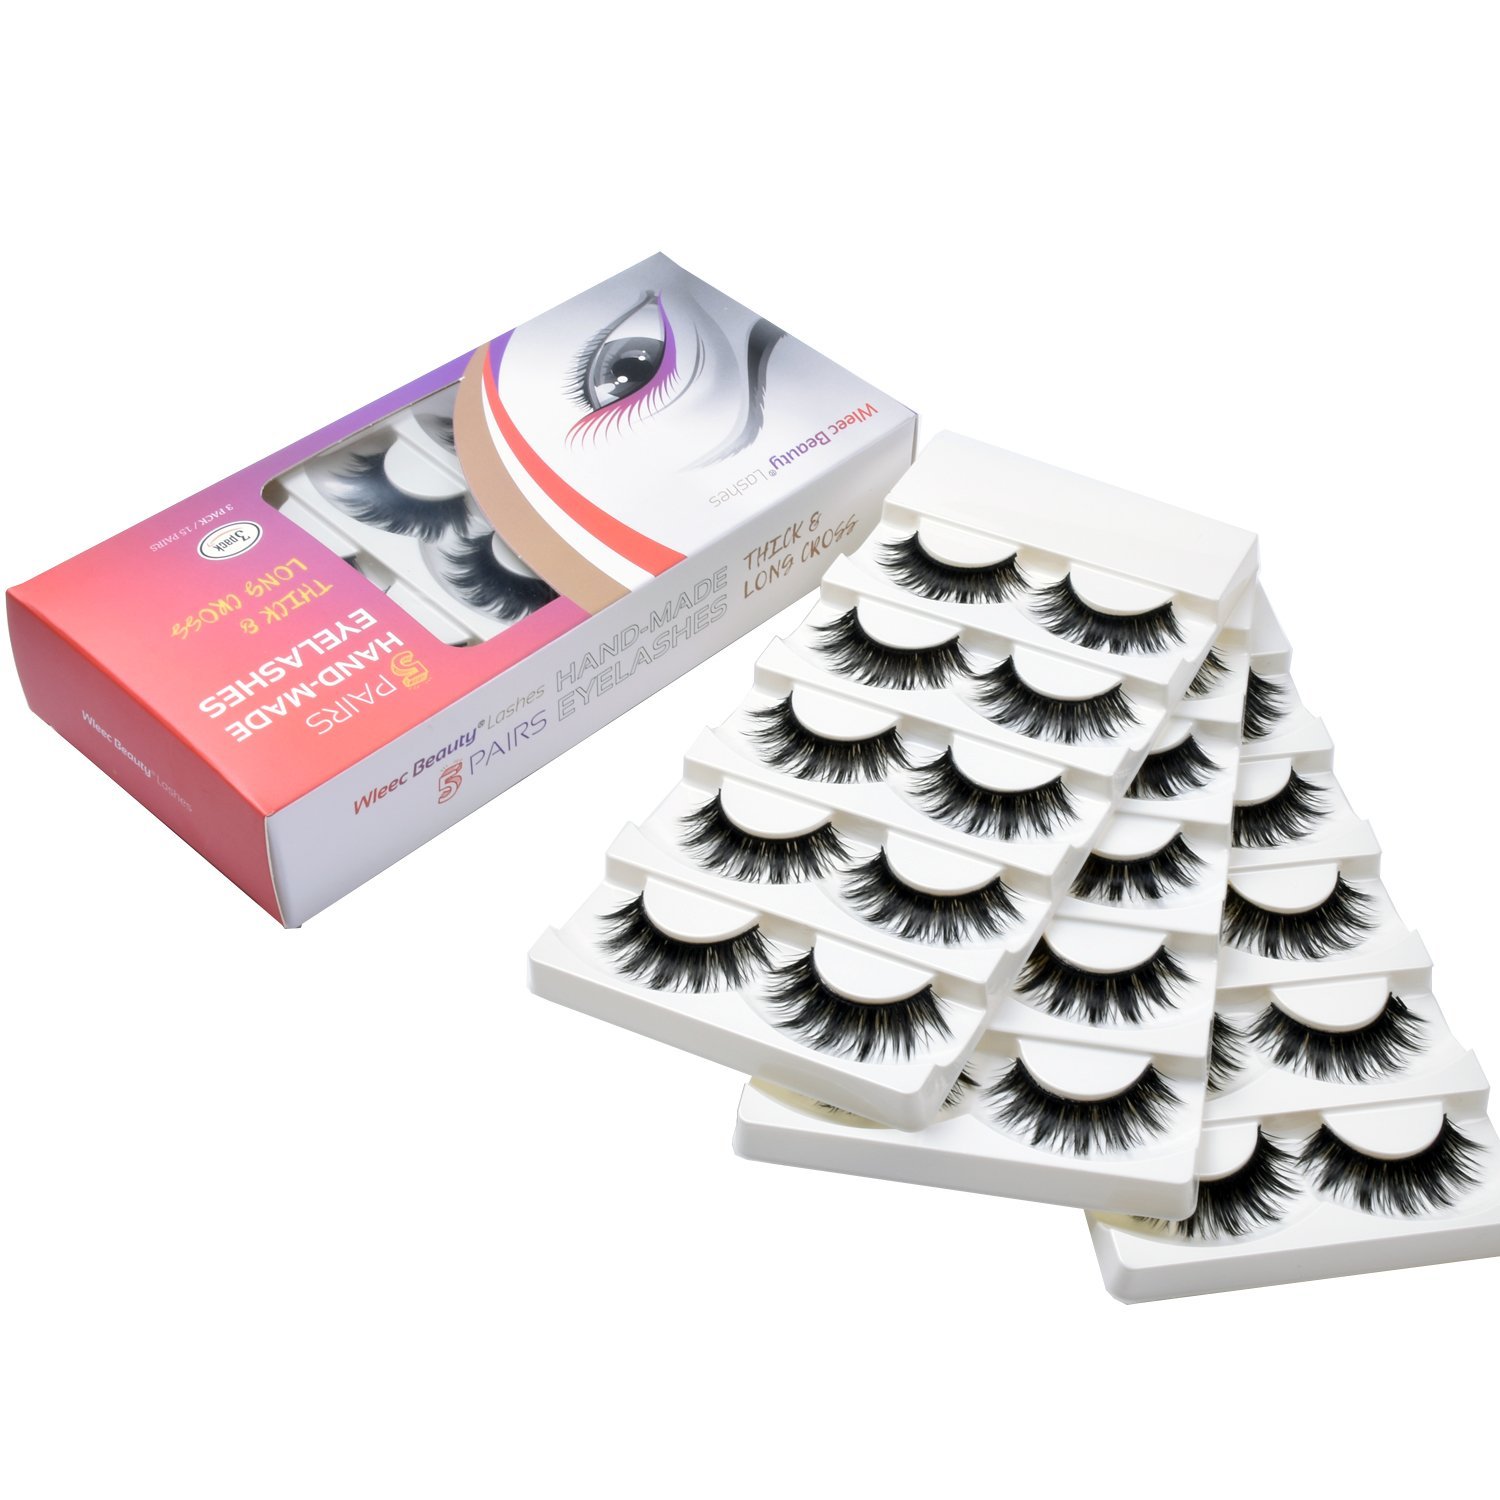 If You Suck at Applying Fake Lashes, These Are The Ones to Try Before Your Next Night Out